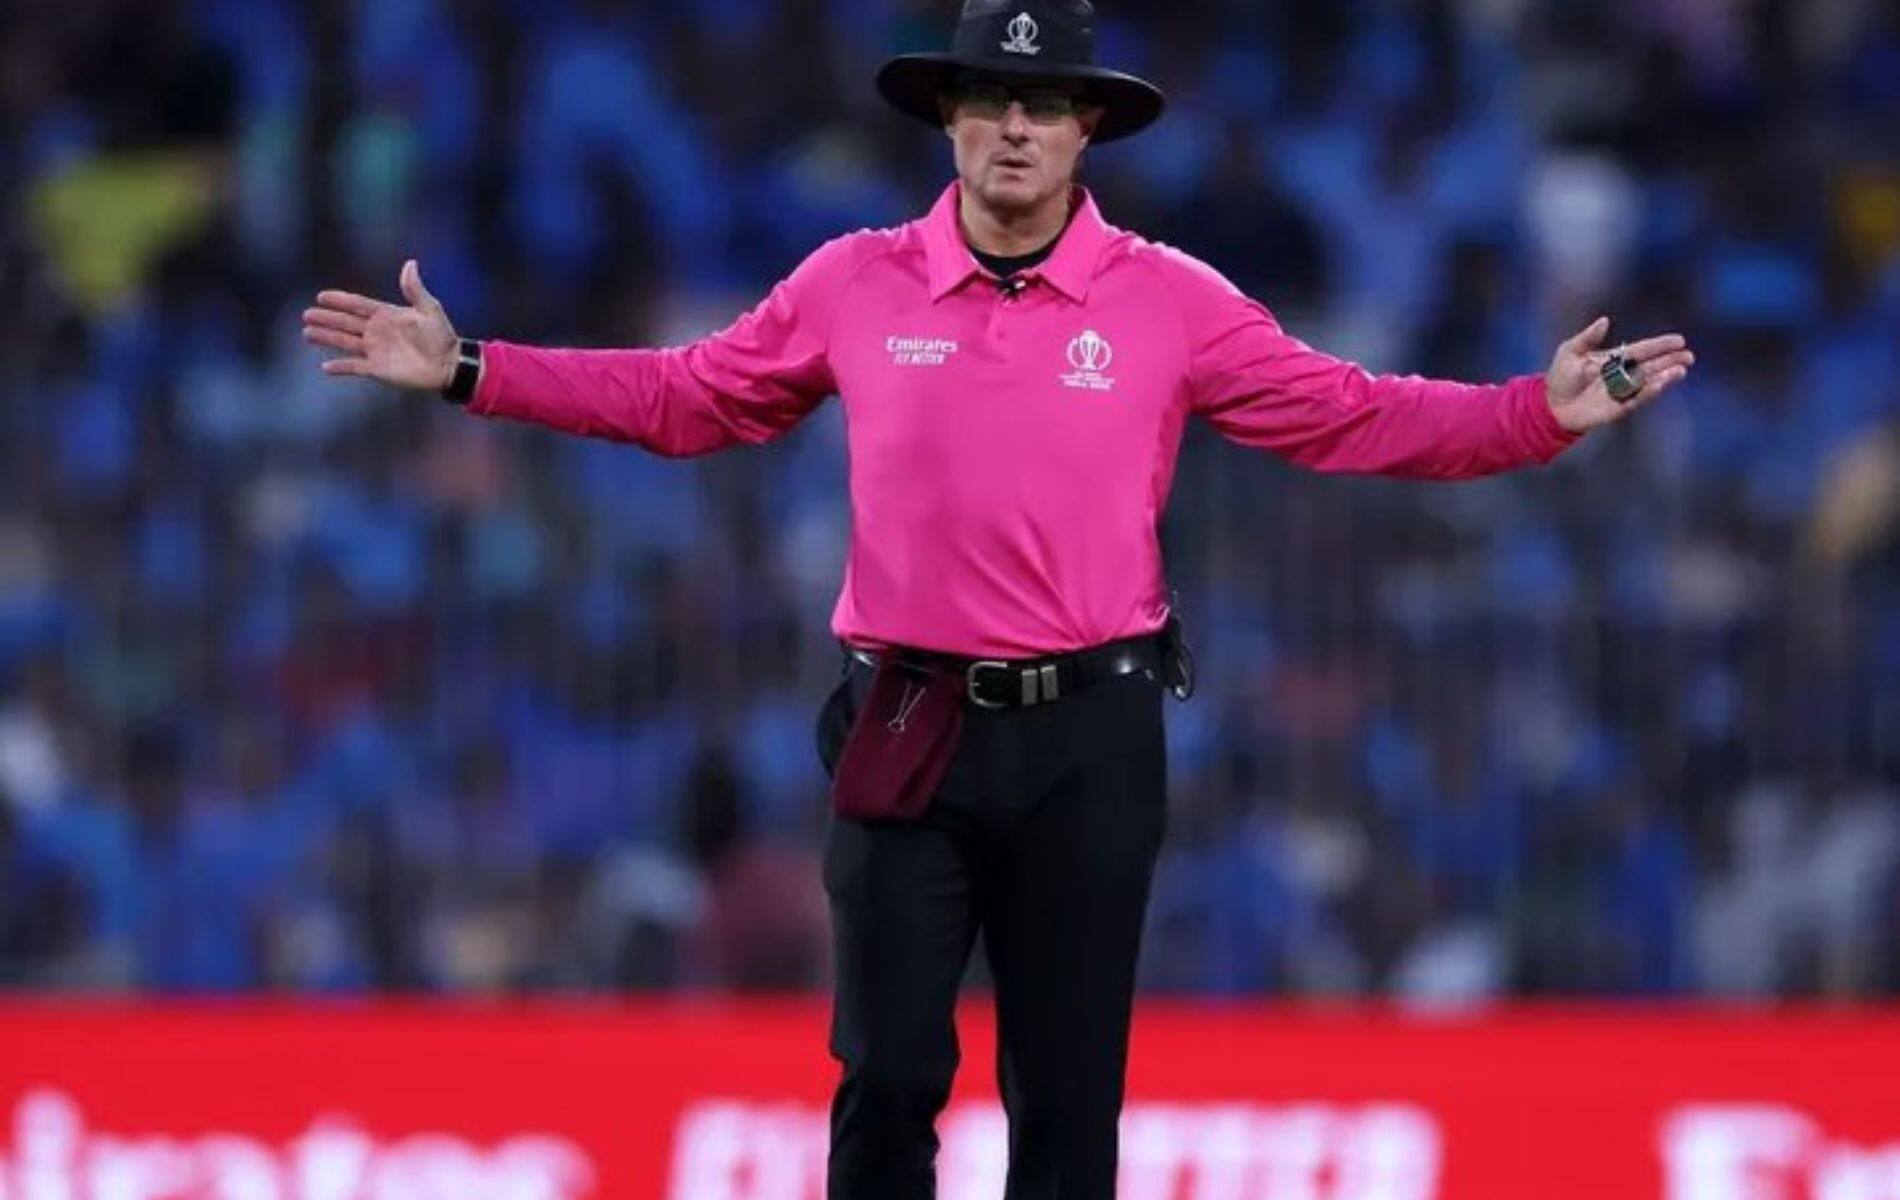 Umpires, Match referees for the group round of ICC T20 World Cup is announced (X)